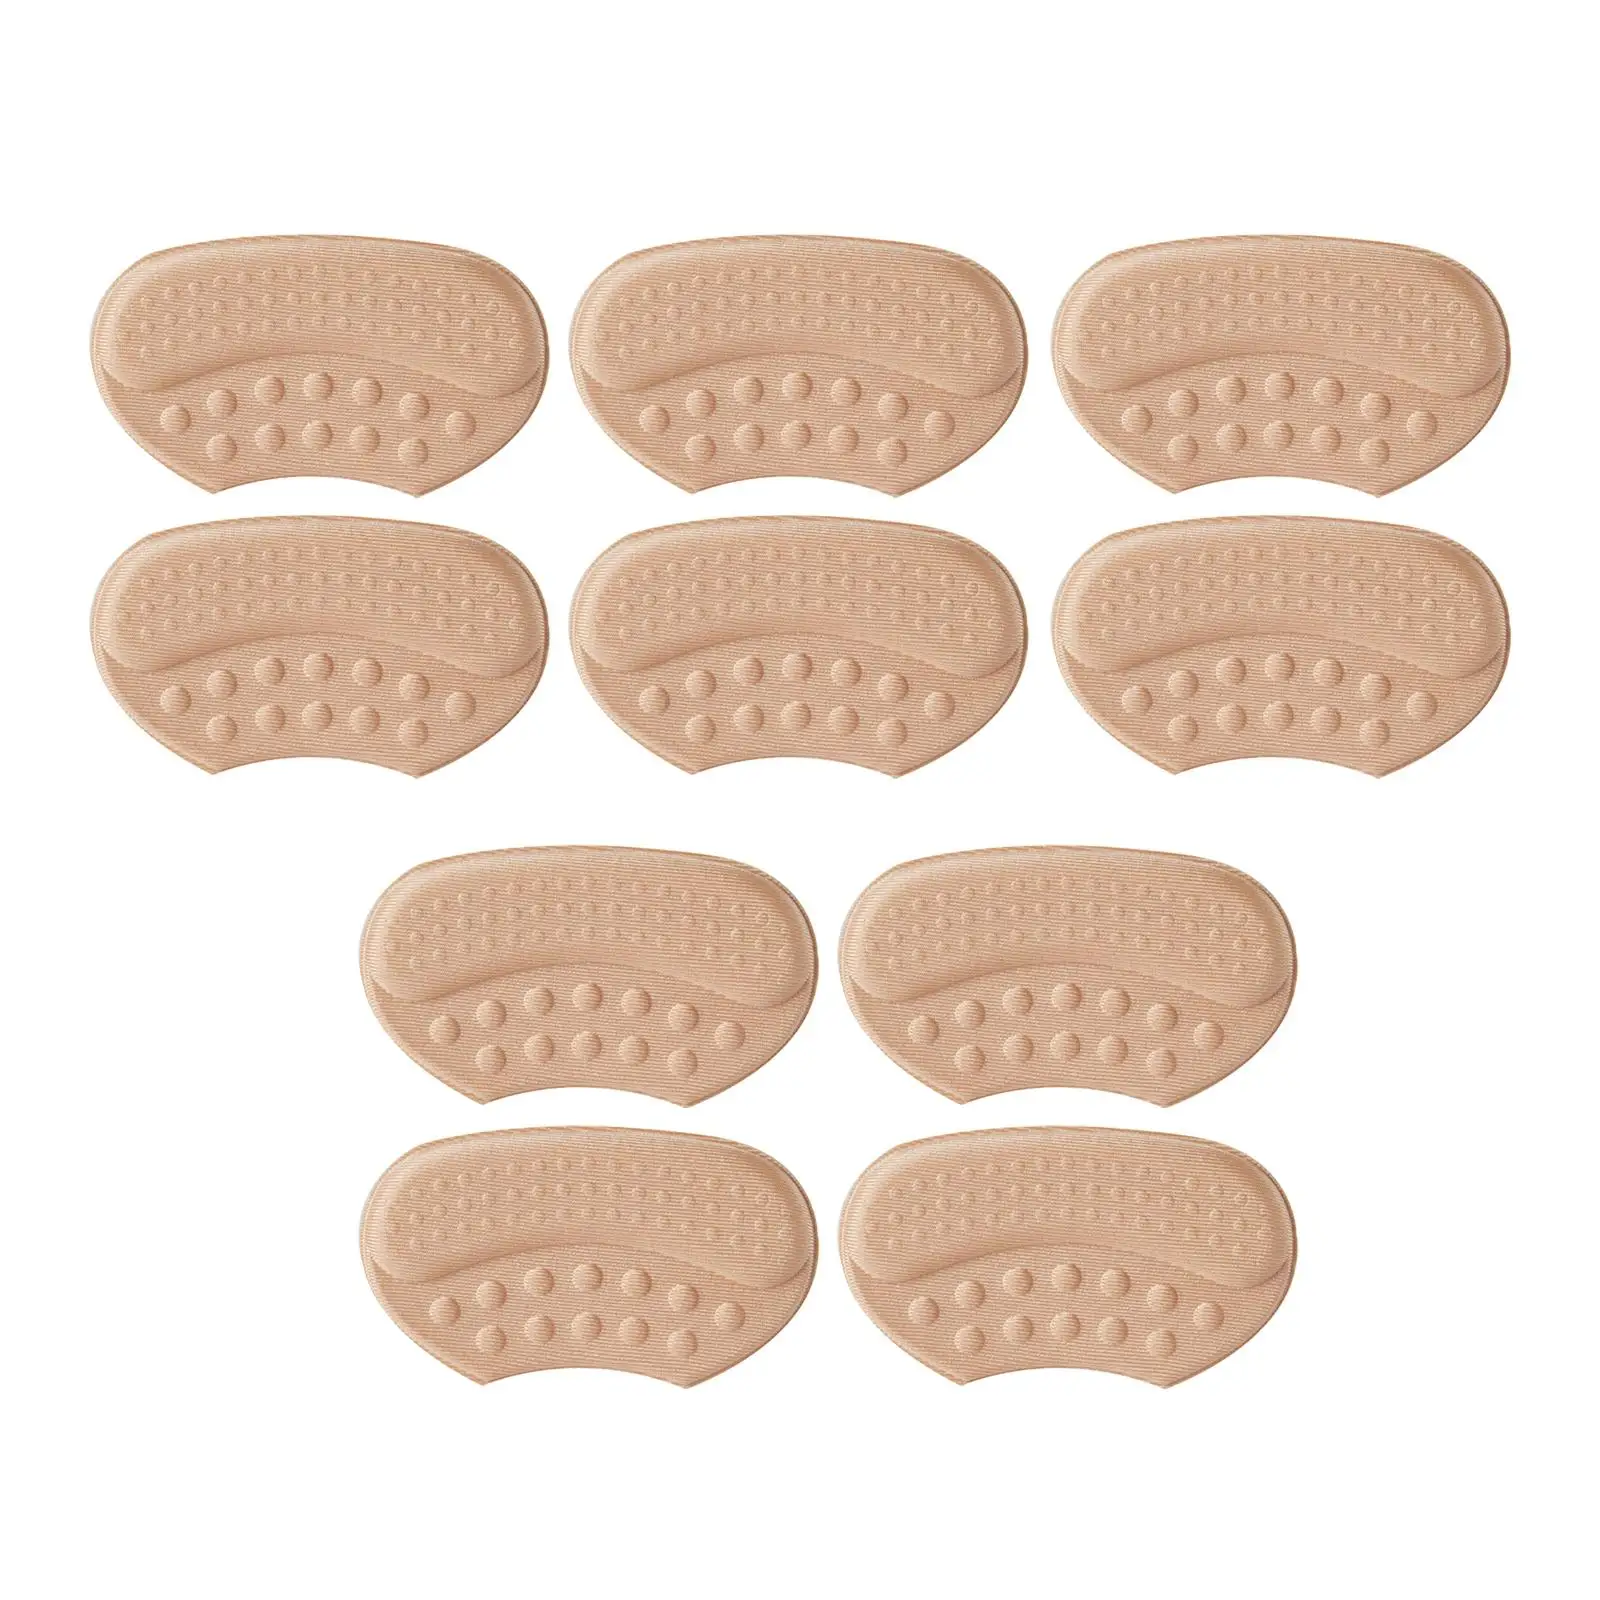  Cushion Pads Durable Comfortable Wear Resistant for Sports Party